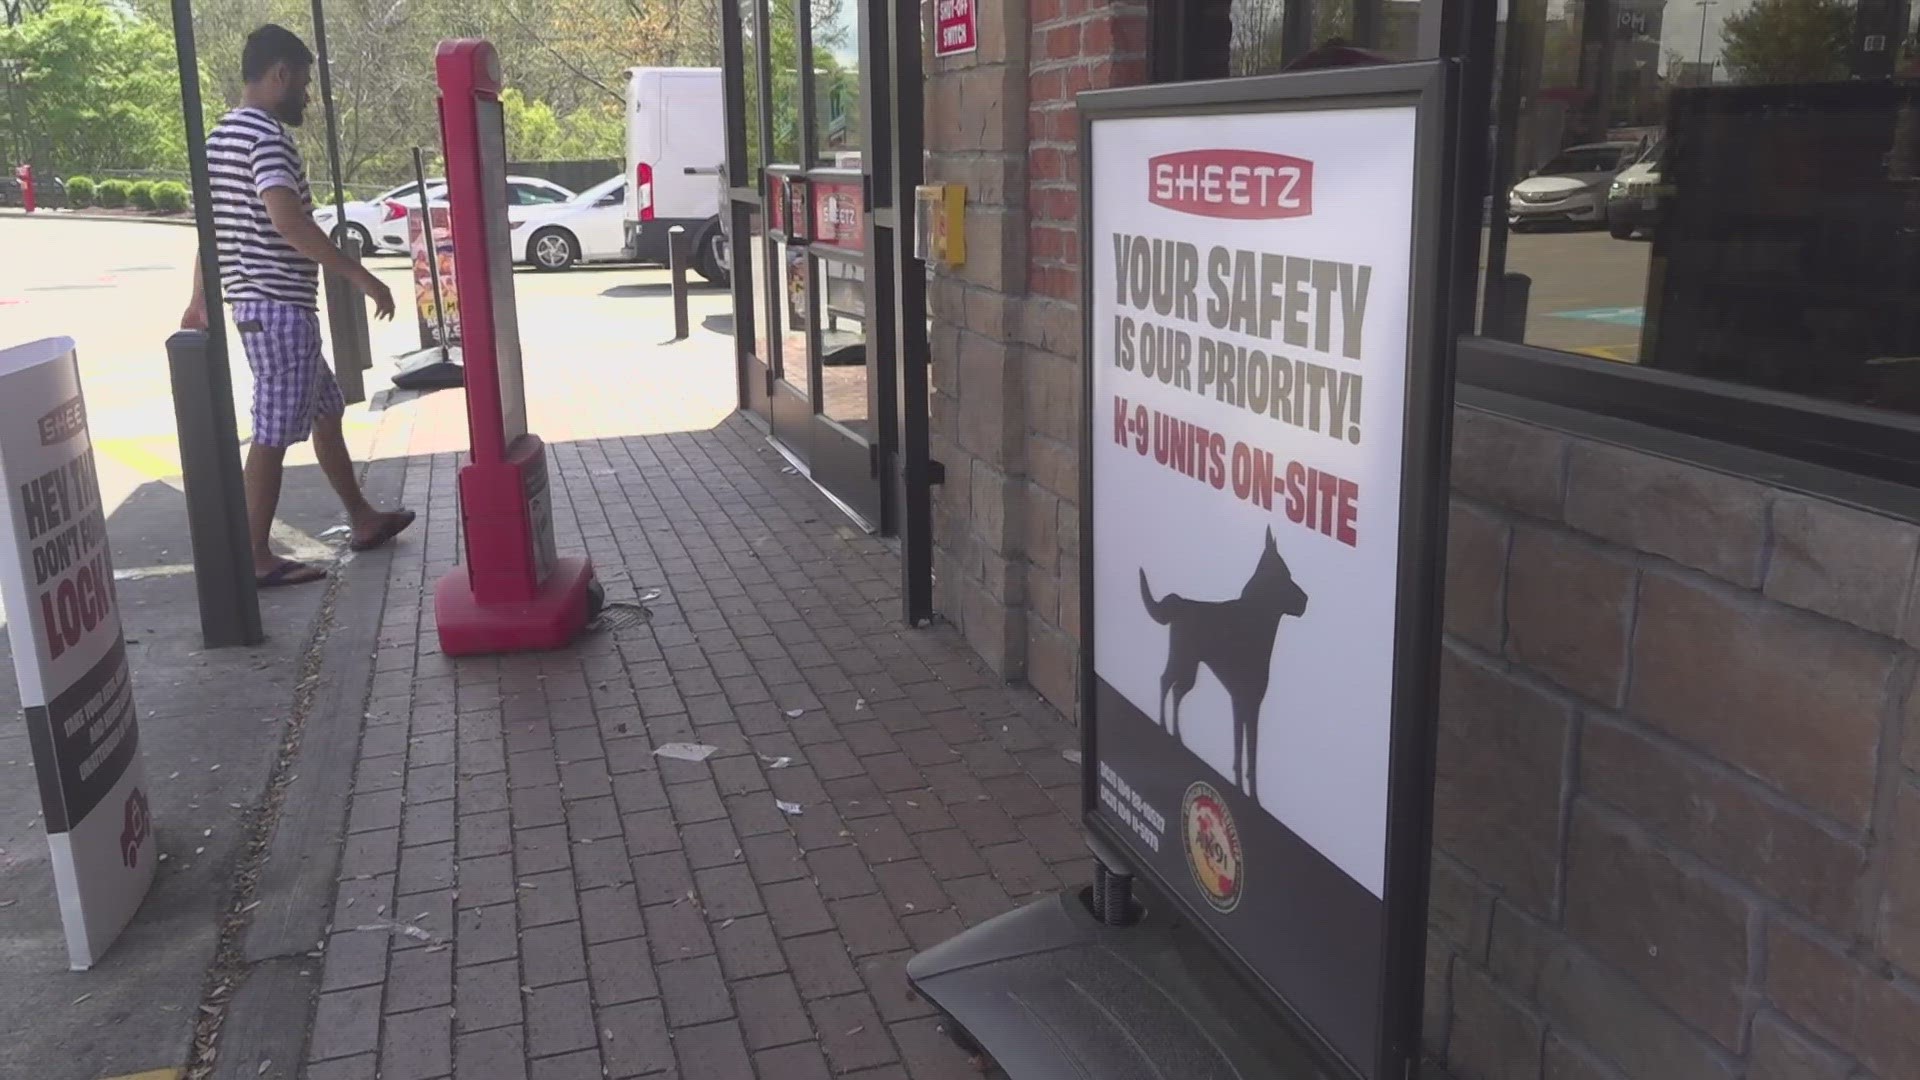 The added security comes after a string of crimes at Sheetz locations.